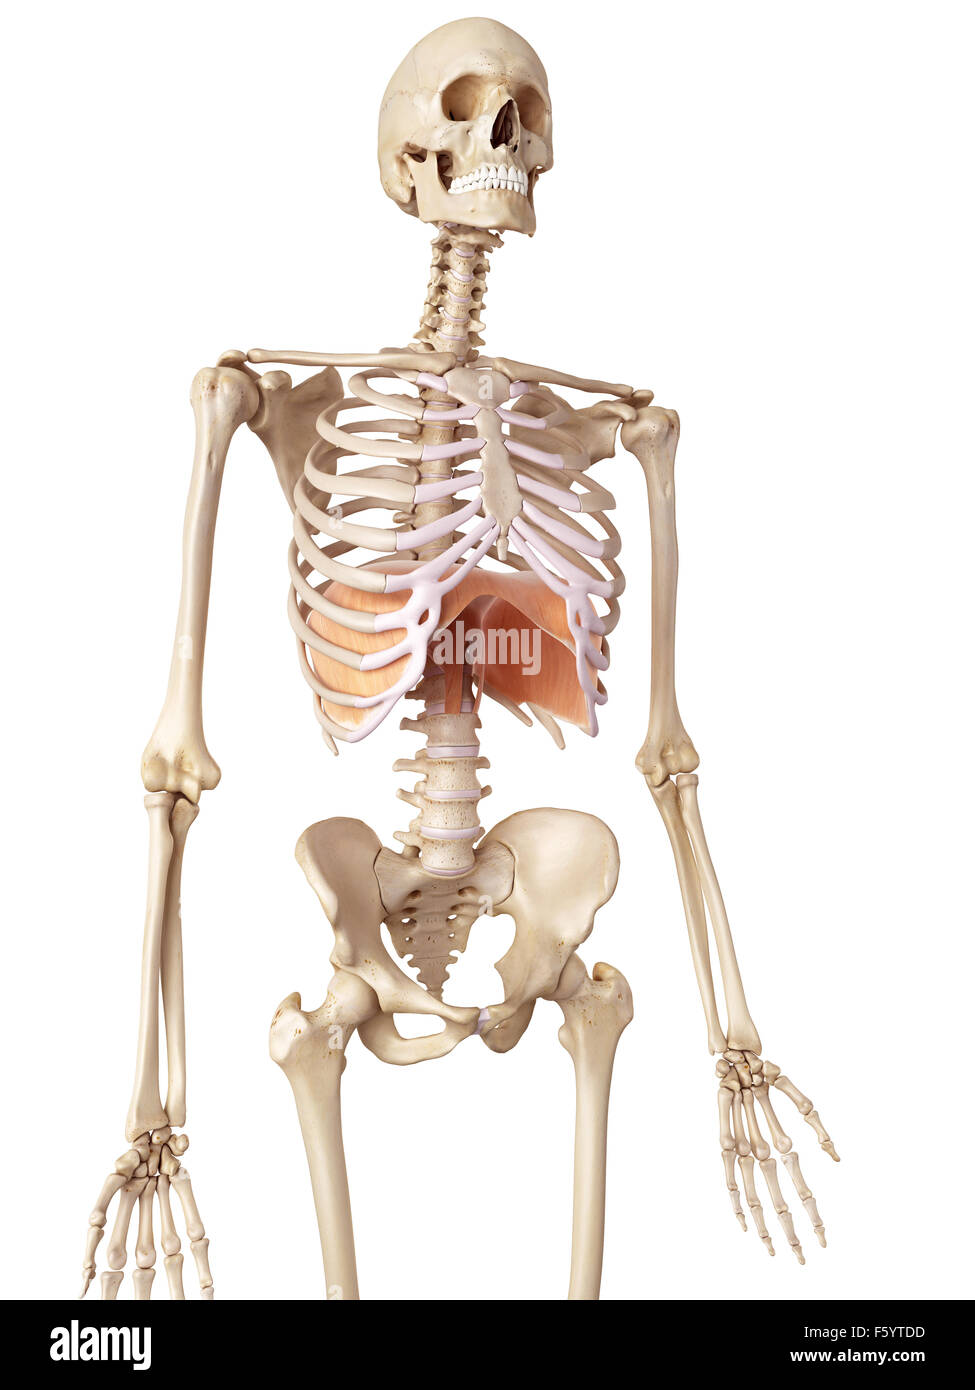 medical accurate illustration of the diaphragm Stock Photo